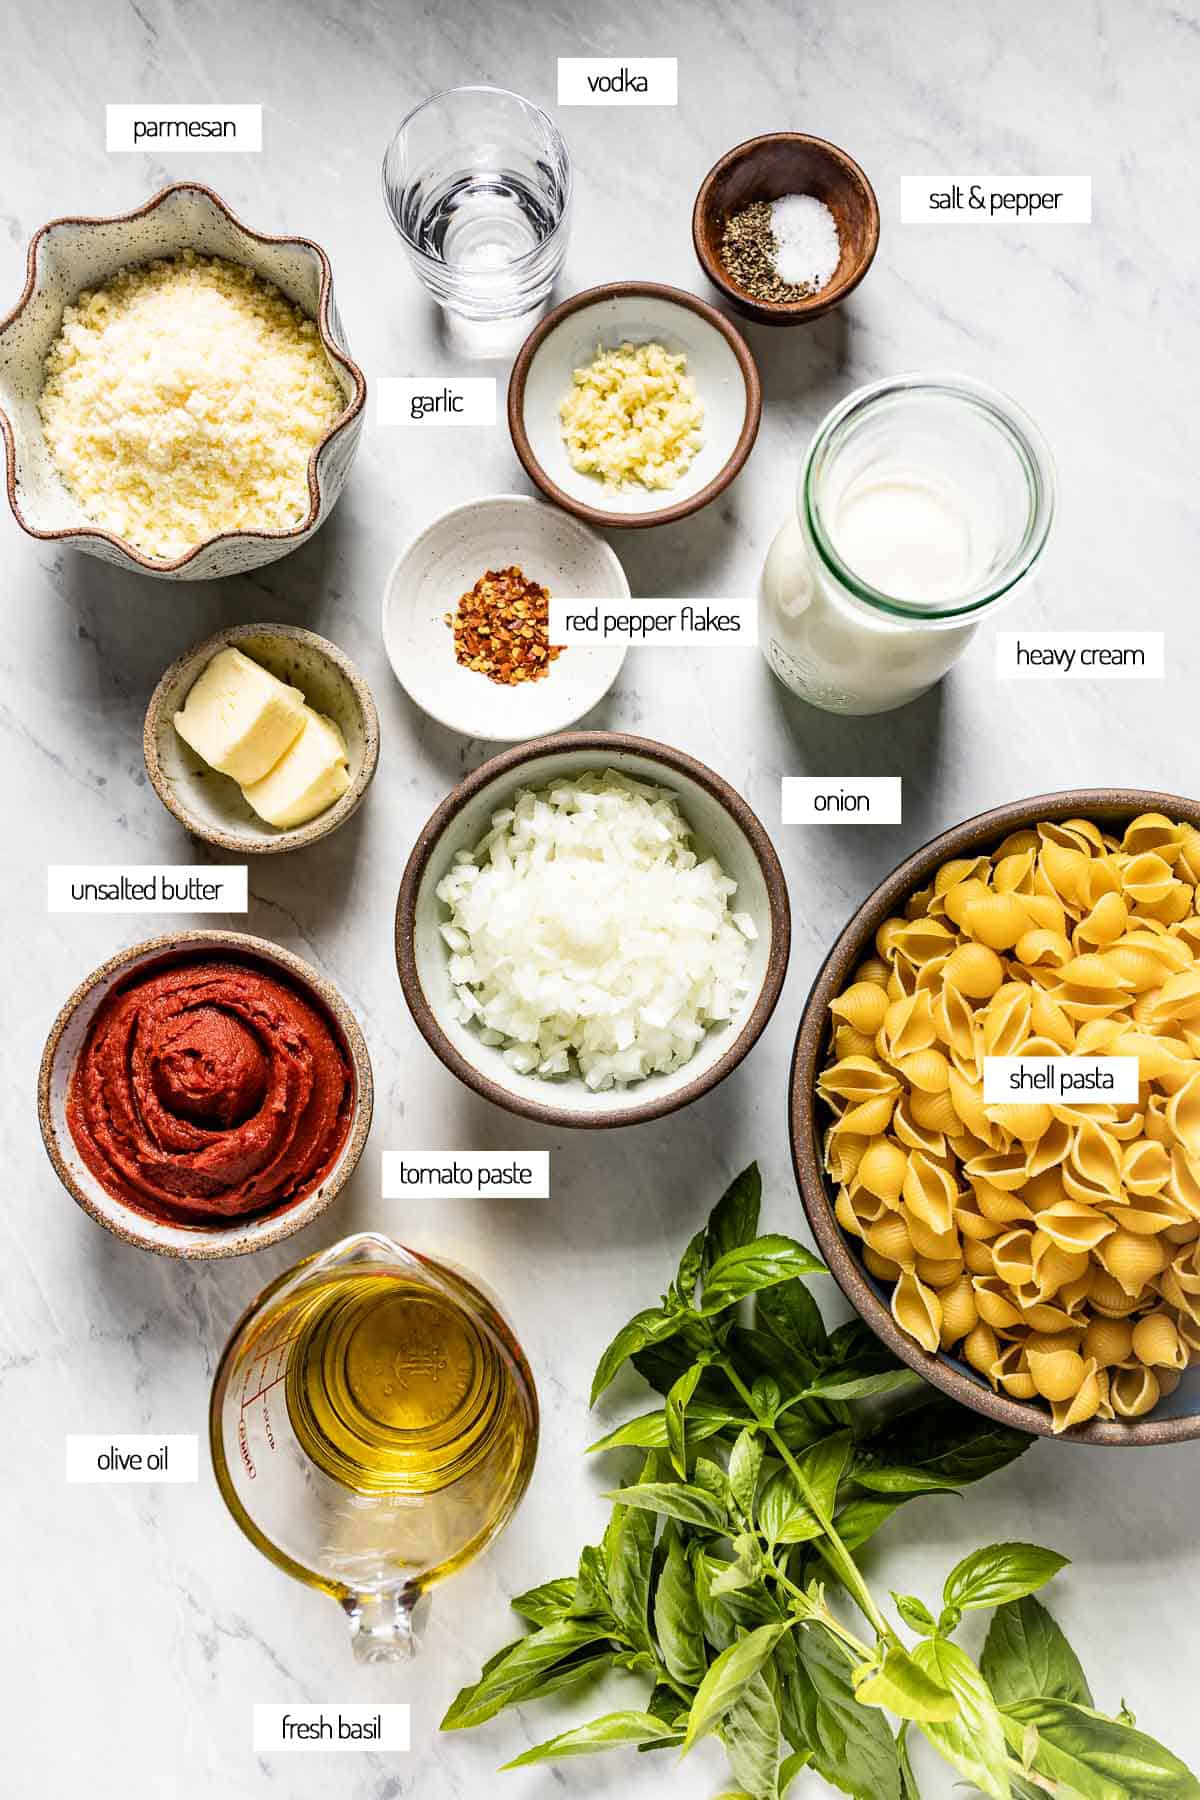 Ingredients for a pasta with spicy vodka sauce from the top view.